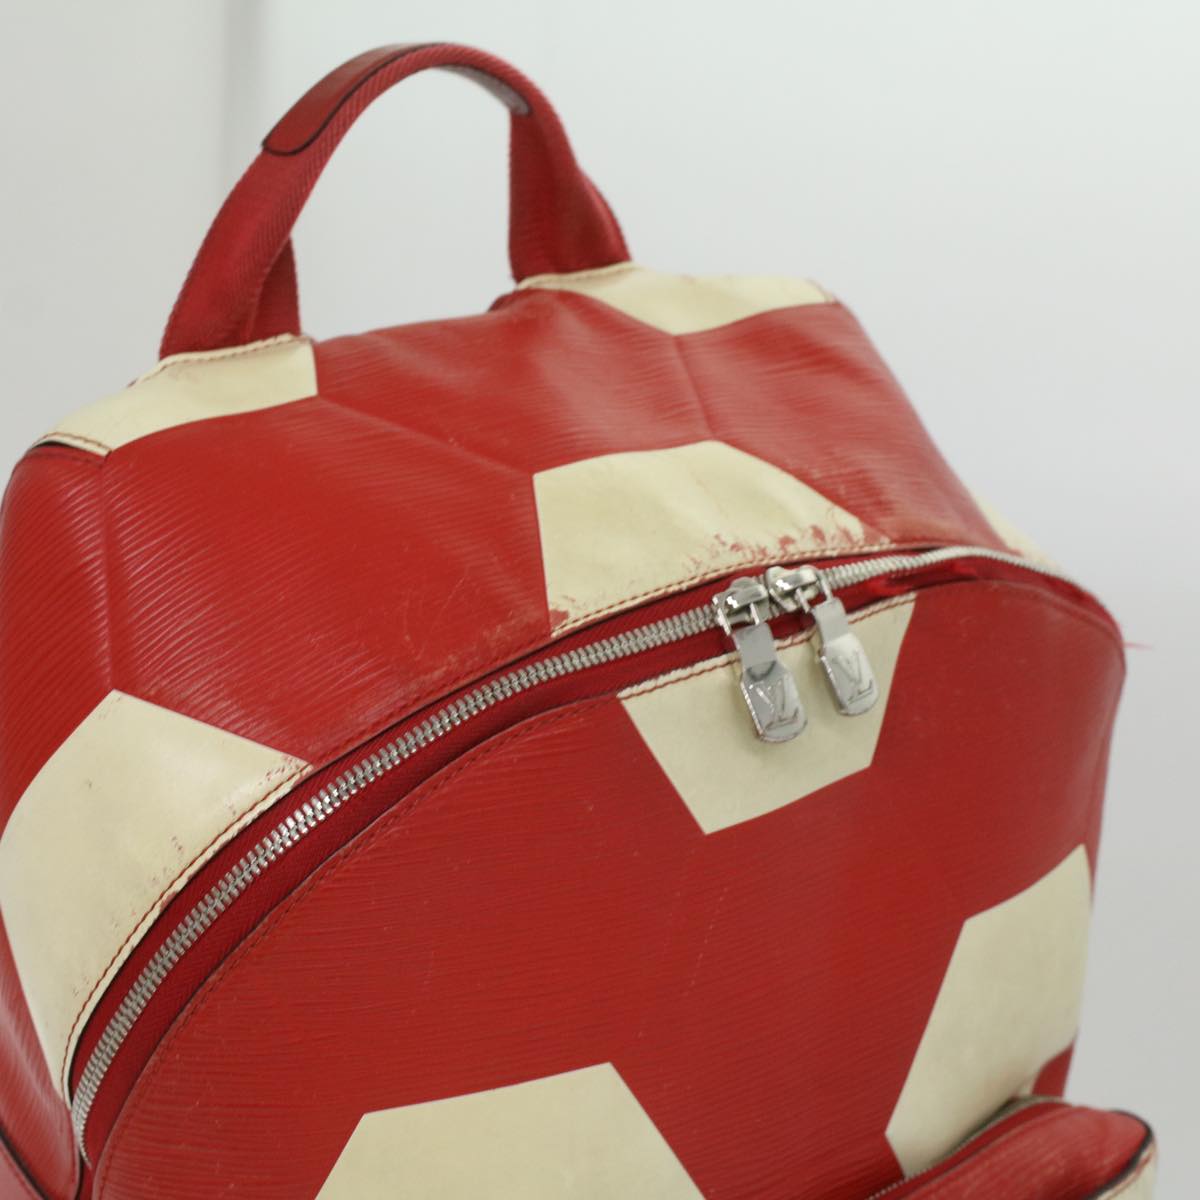 LOUIS VUITTON Epi Apollo Backpack 2018 FIFA World Cup Red M52117 LV Auth 33515